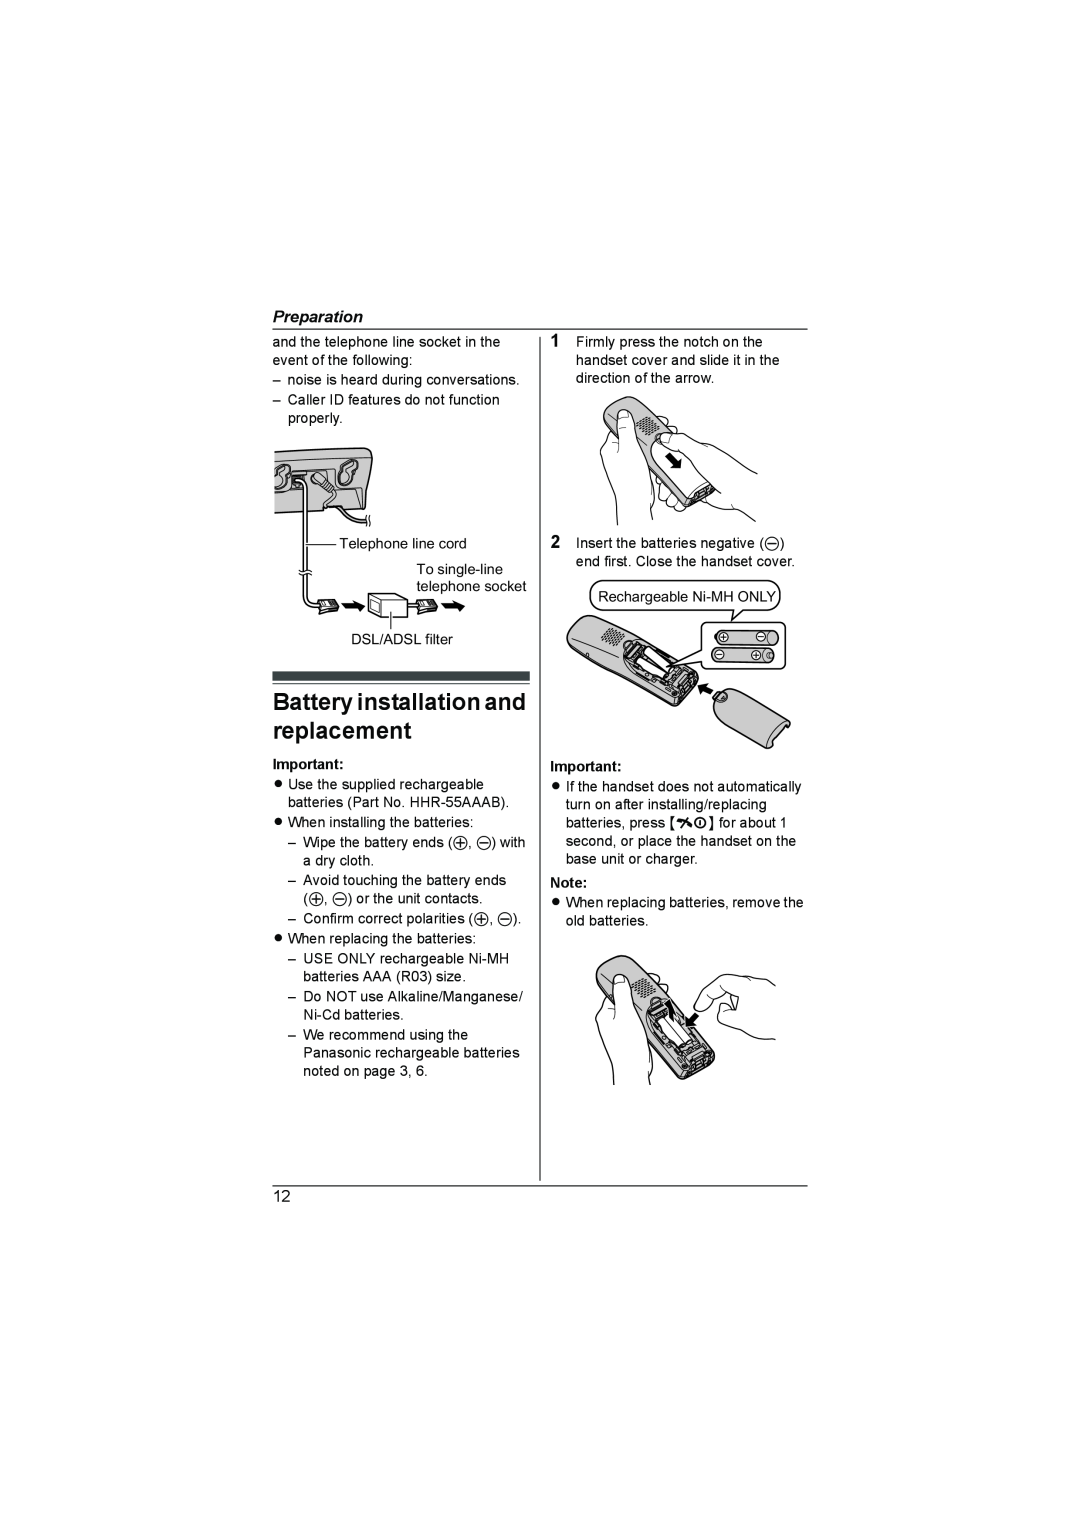 Panasonic KX-TG7341NZ operating instructions Battery installation and replacement, Preparation 